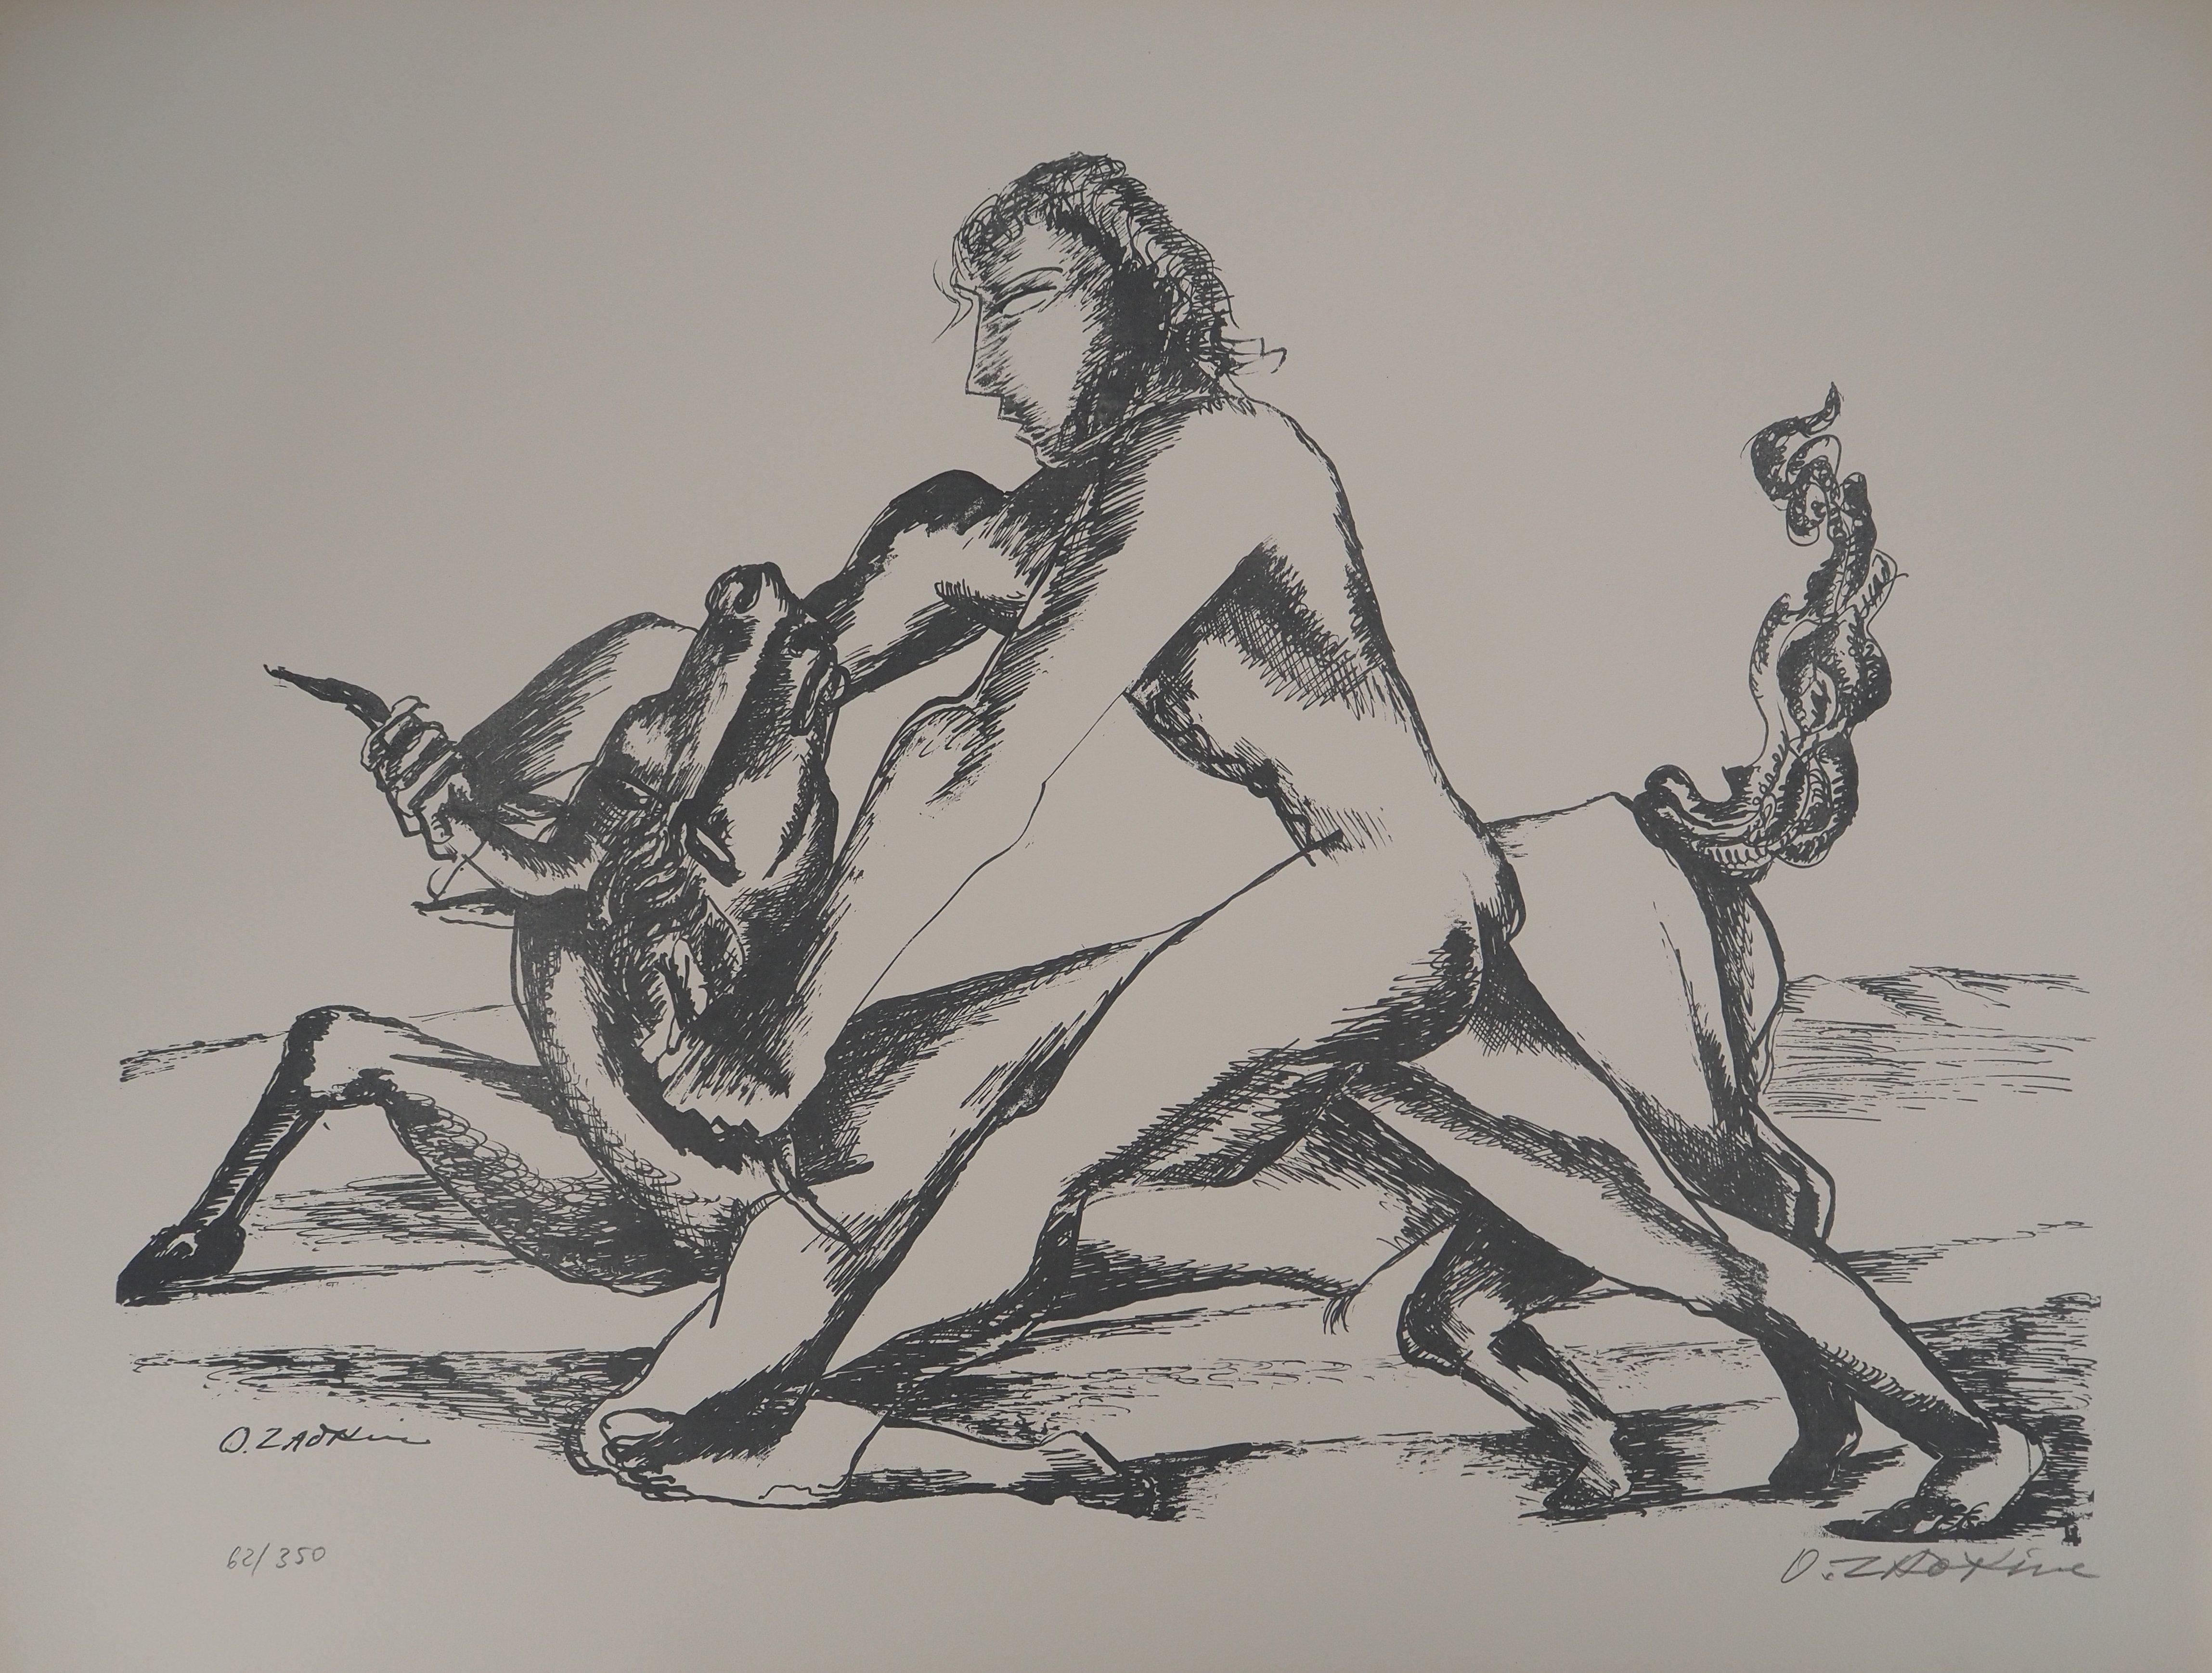 Ossip Zadkine Figurative Print - Mythology : Heracles and the Bull -Original Lithograph Hand Signed & Numbered